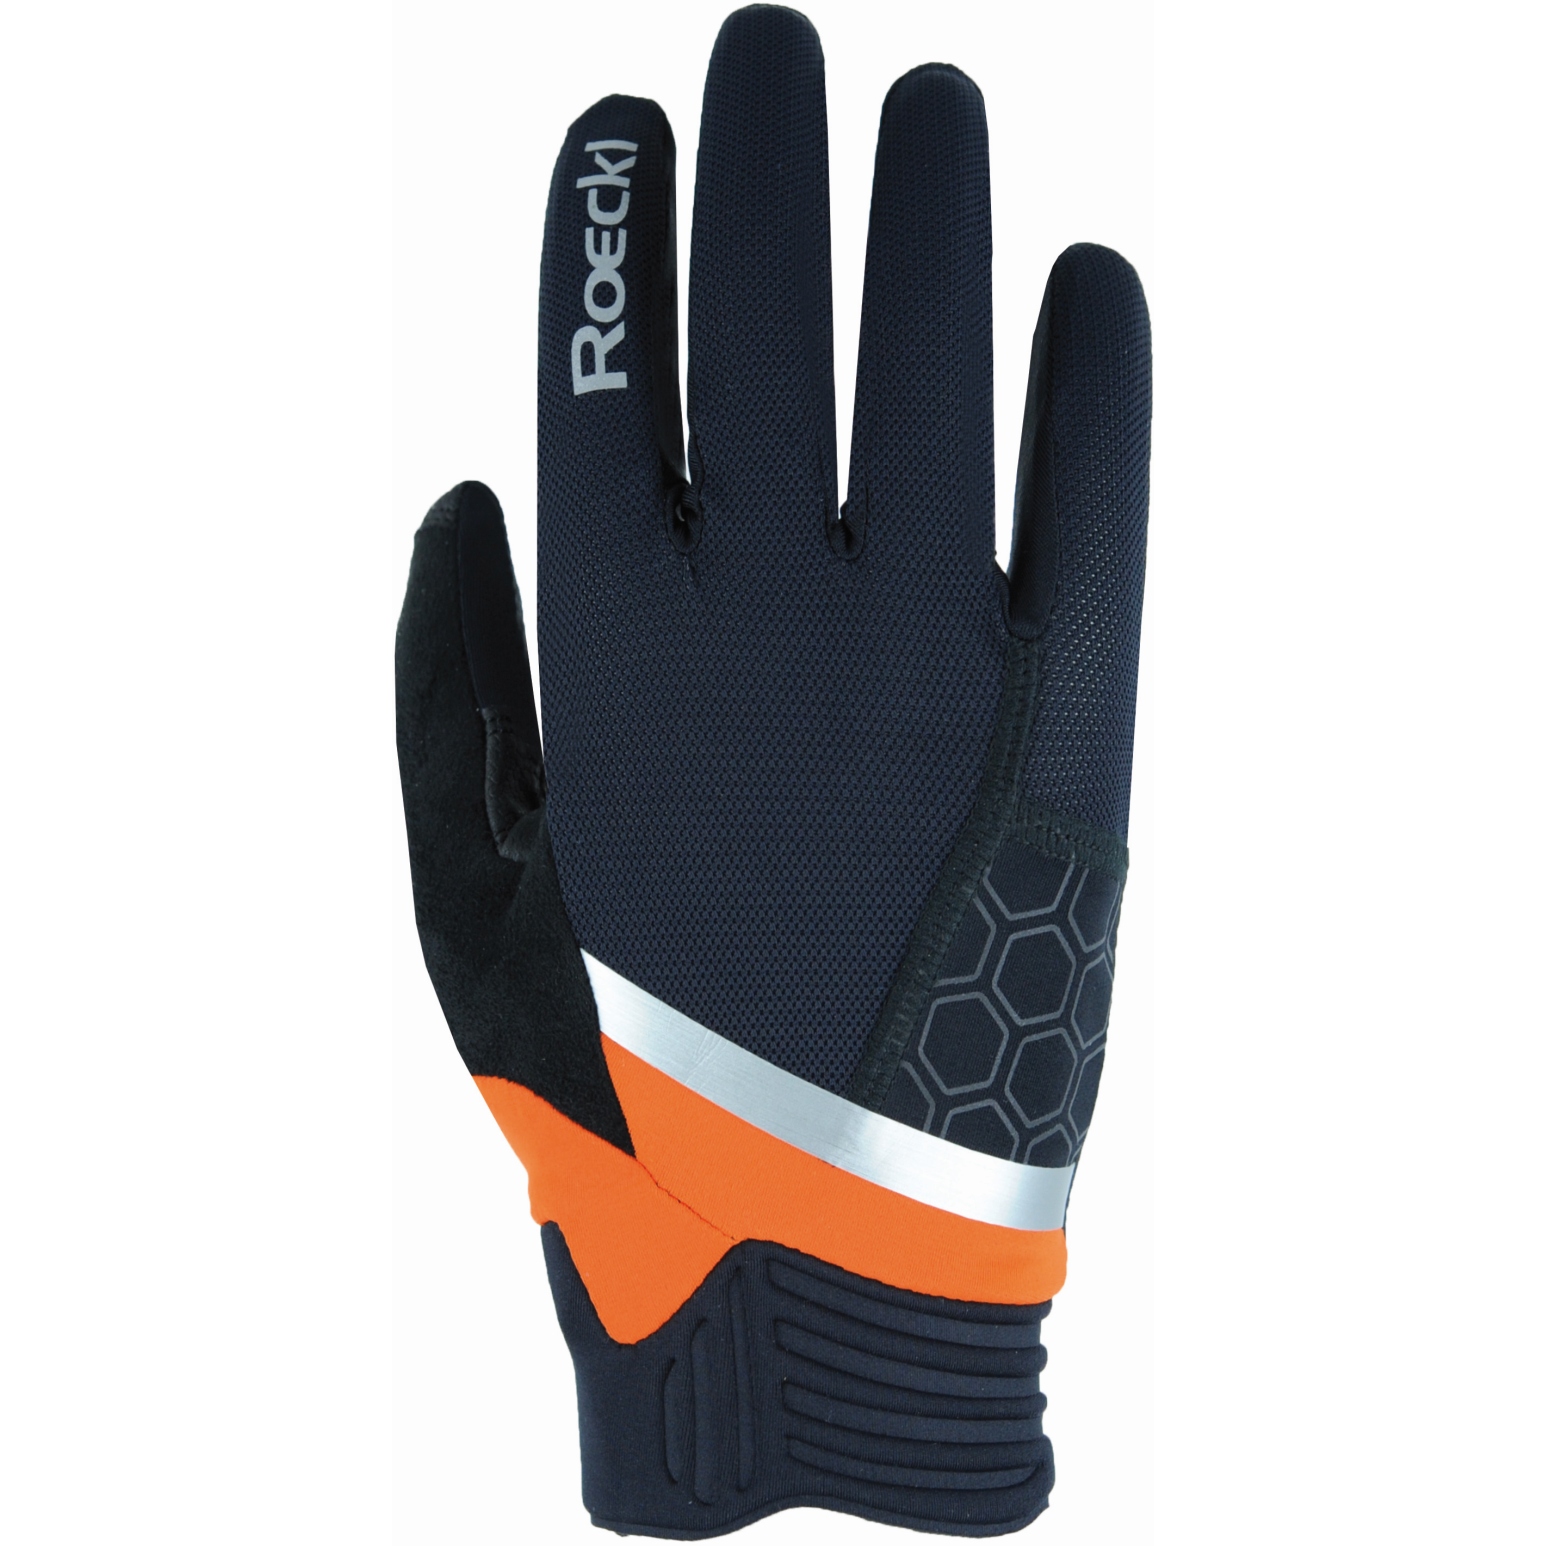 Picture of Roeckl Sports Morgex Cycling Gloves - black/orange 0003